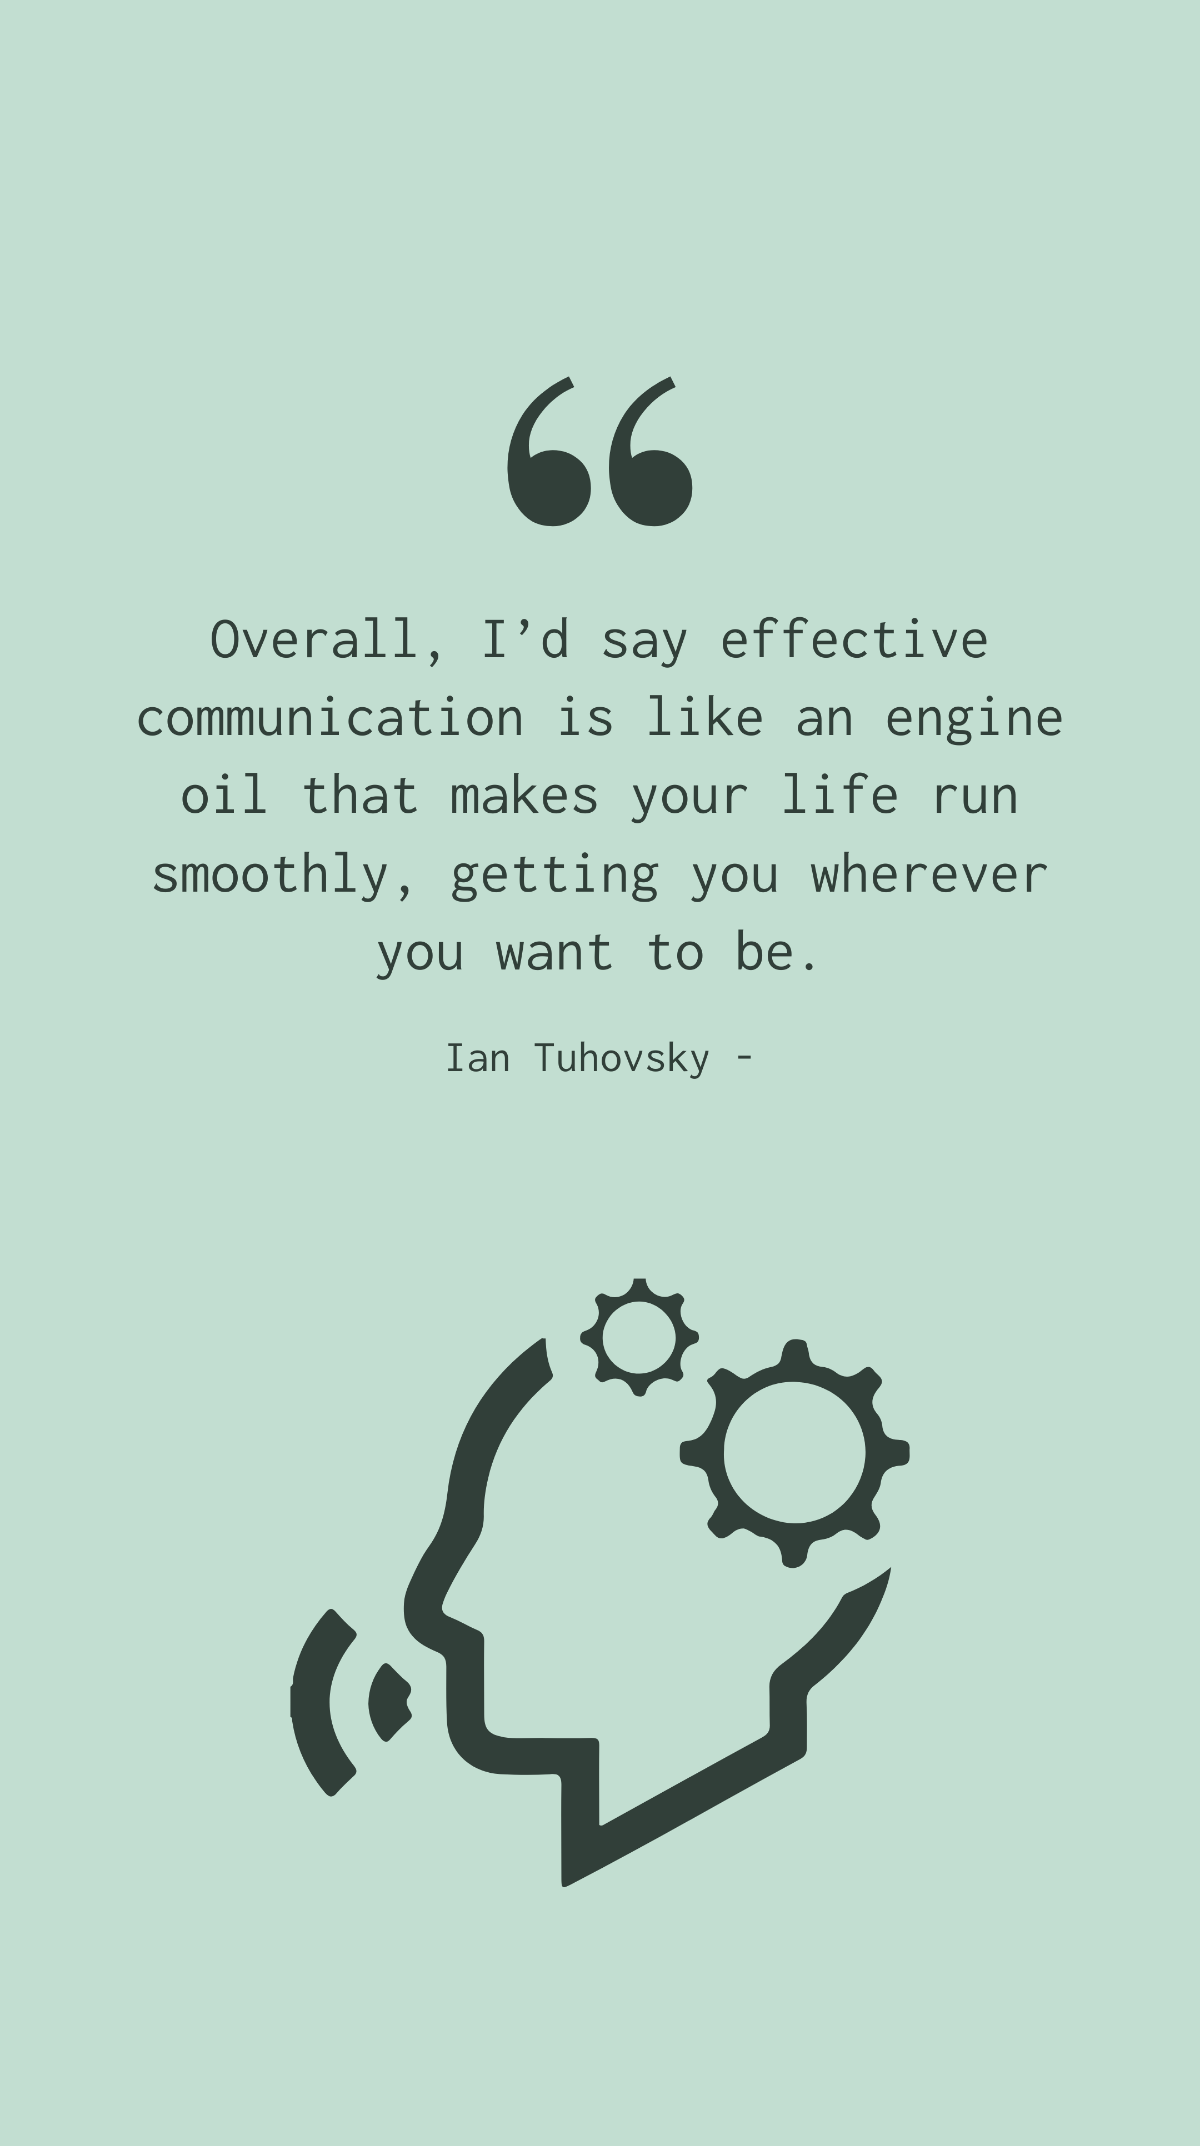 Ian Tuhovsky - Overall, I’d say effective communication is like an engine oil that makes your life run smoothly, getting you wherever you want to be. Template